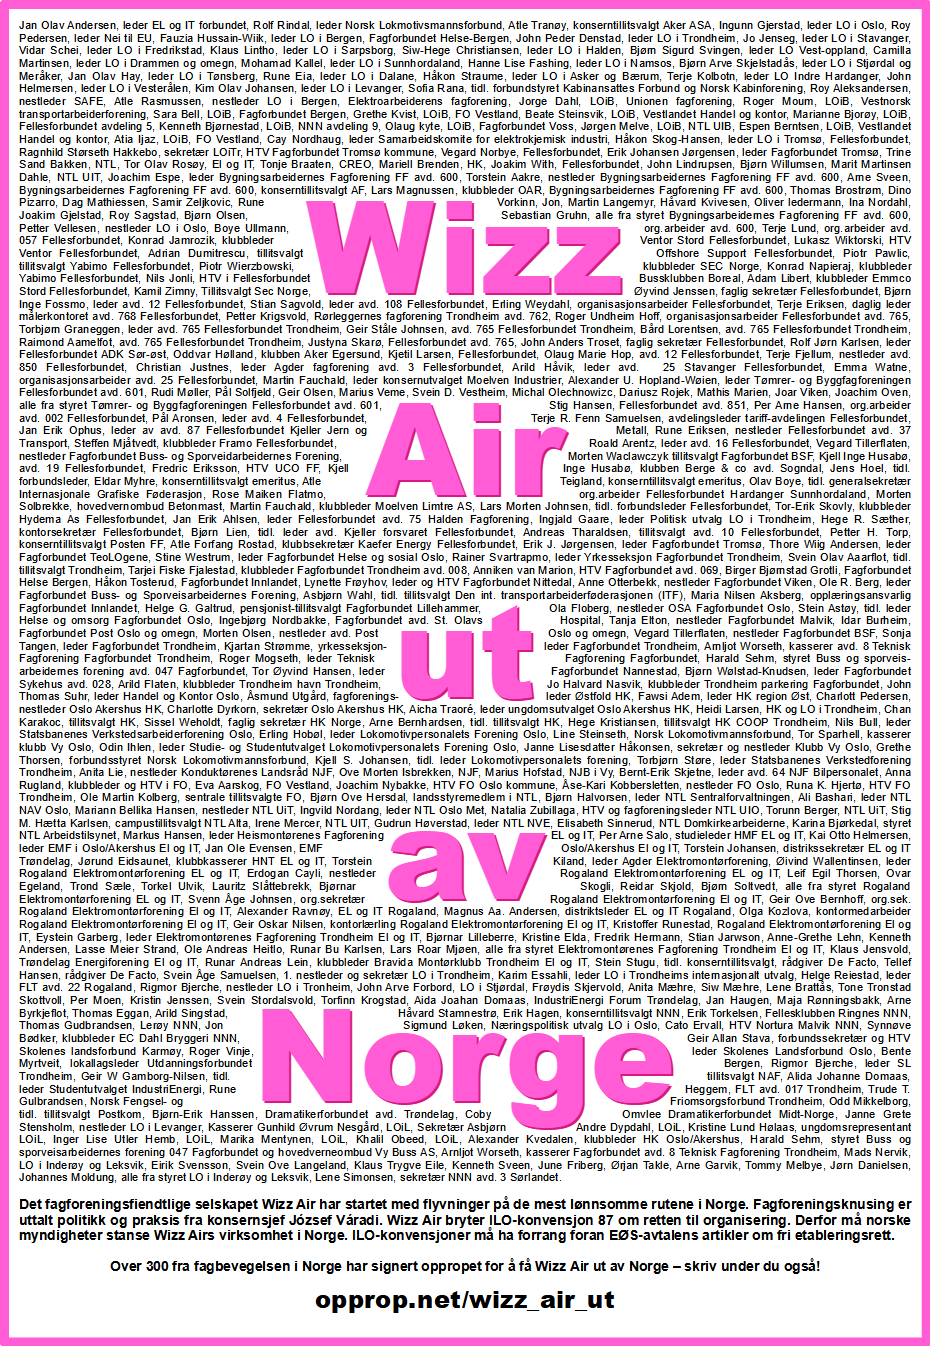 Wizz_Air-annonse.png